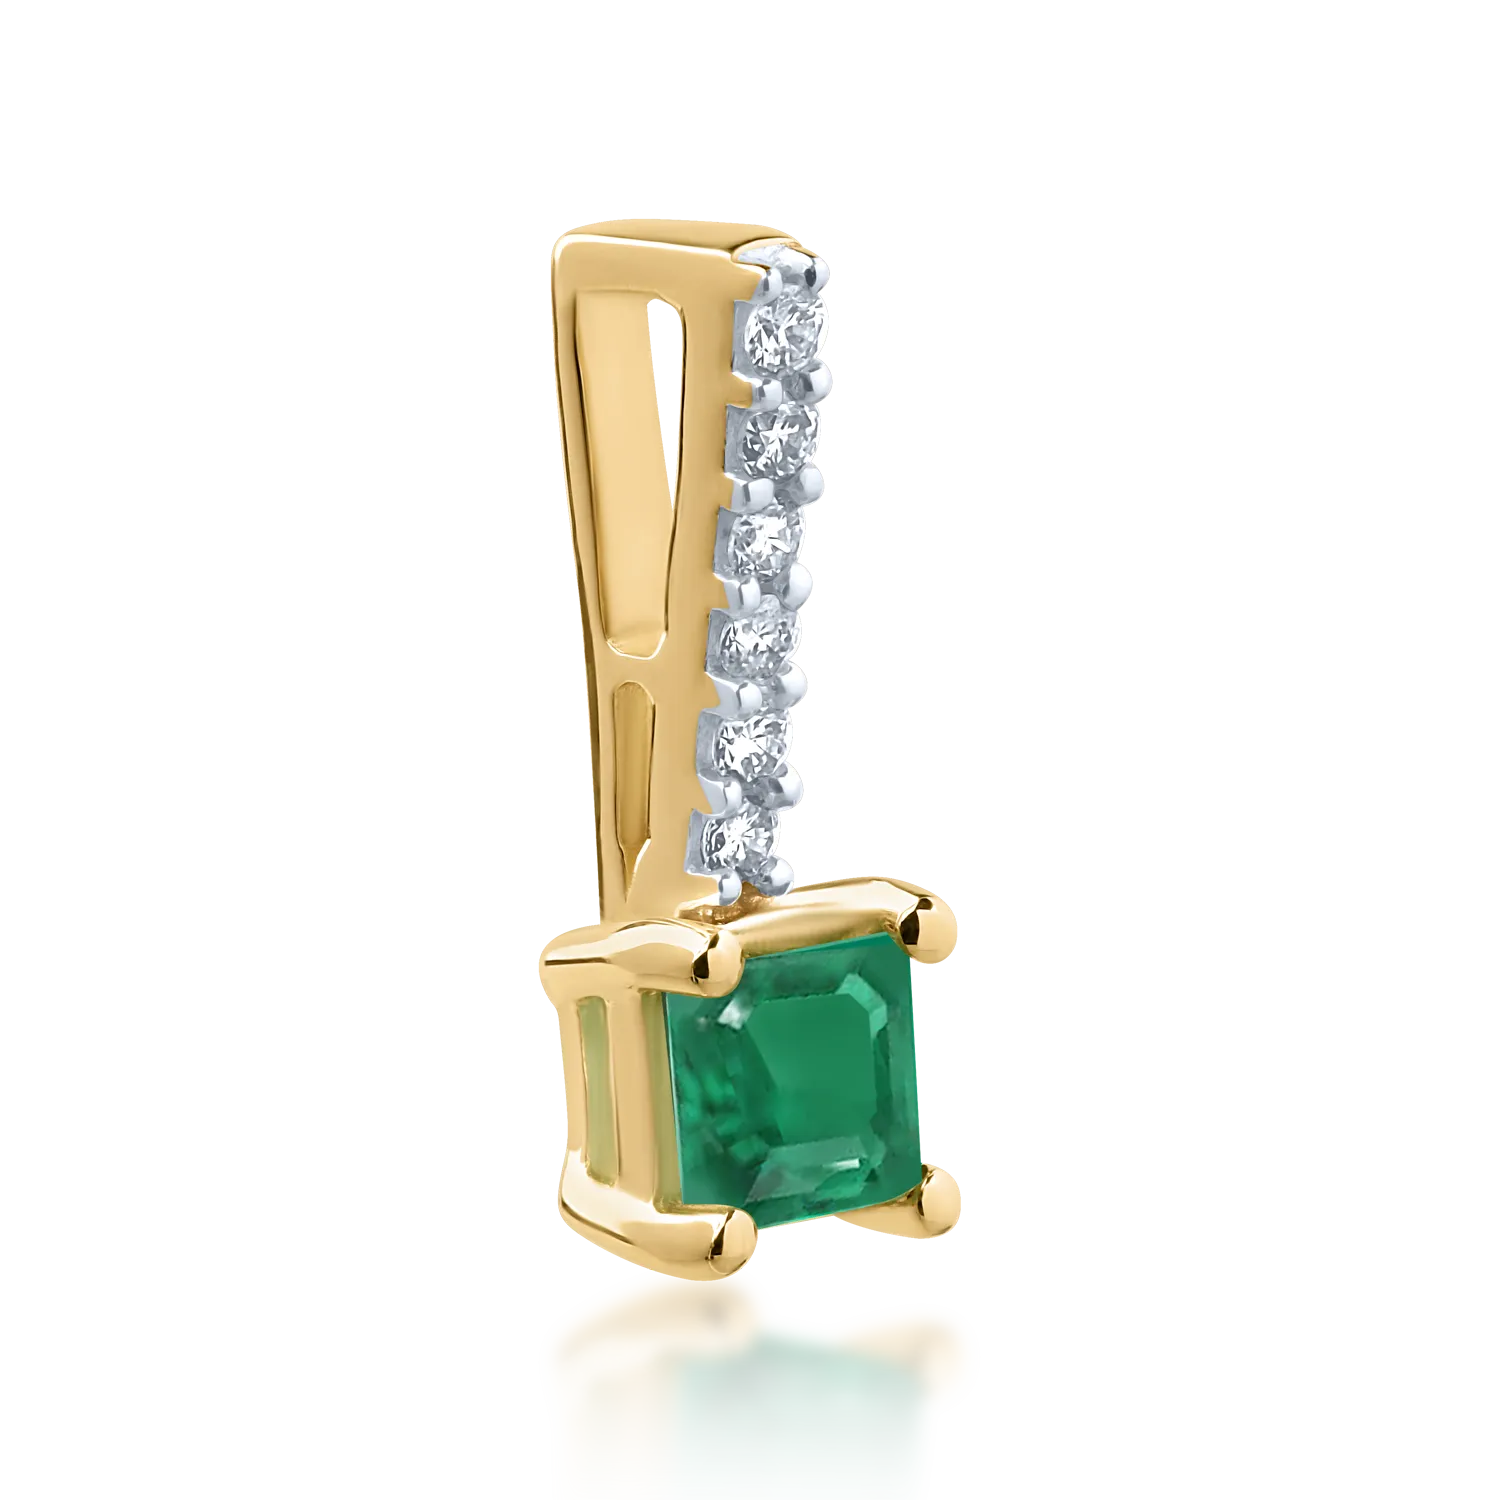 14K yellow gold pendant with a 0.141ct emerald and 0.03ct diamonds